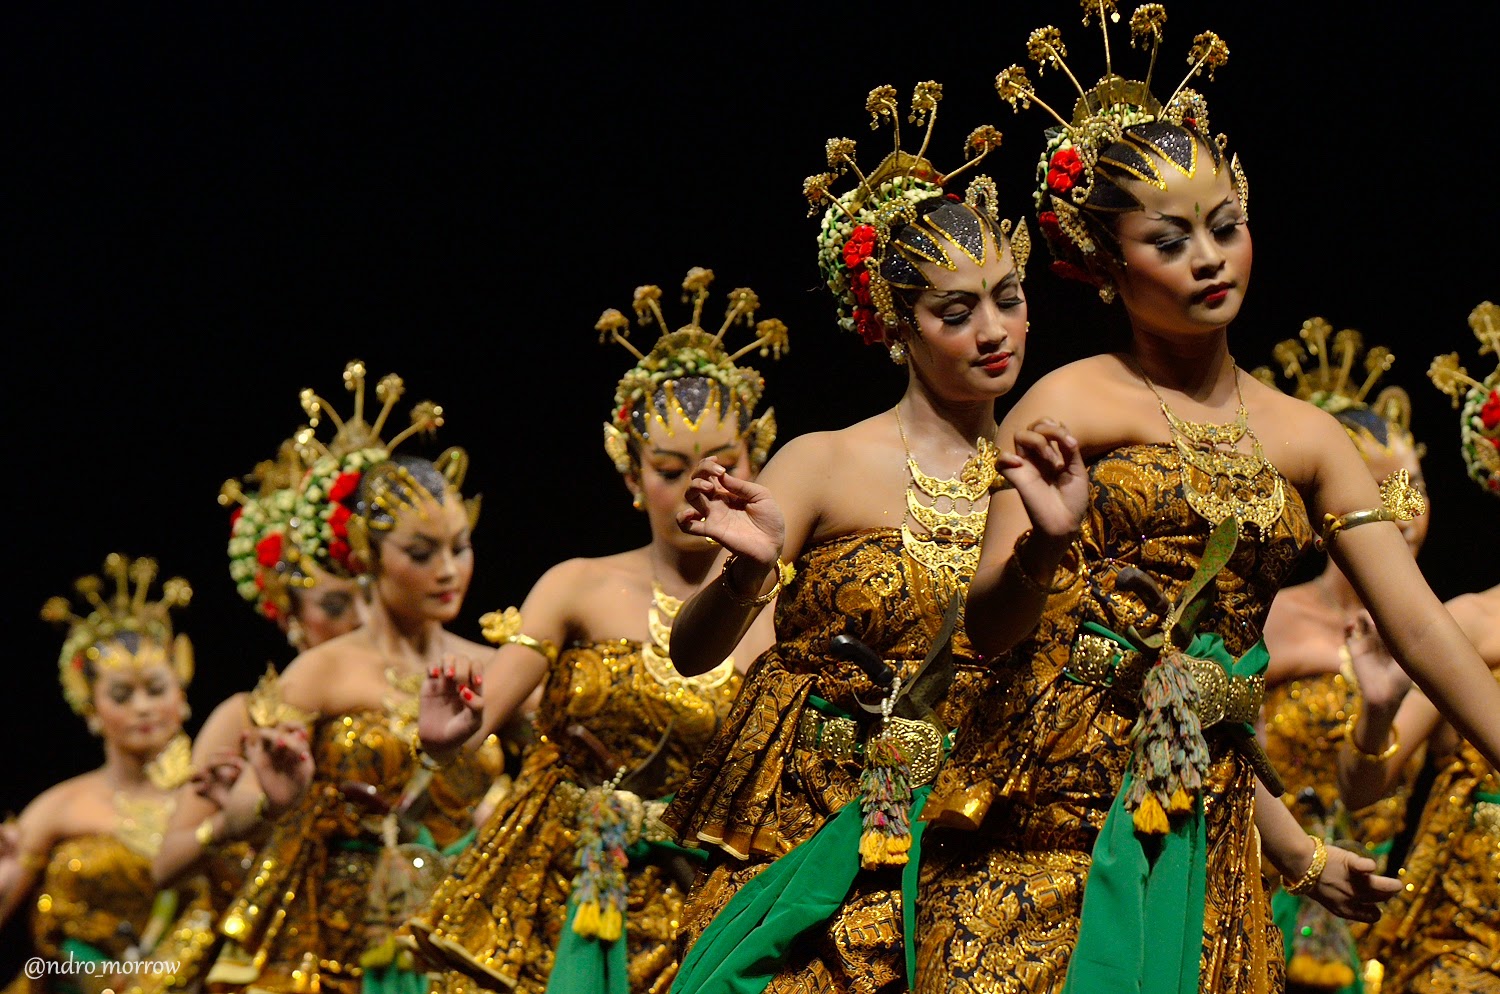  Five female dancers in golden and green traditional Javanese costumes perform the Bedhaya Semang dance, a sacred dance of the Javanese court, accompanied by traditional Javanese gamelan music.